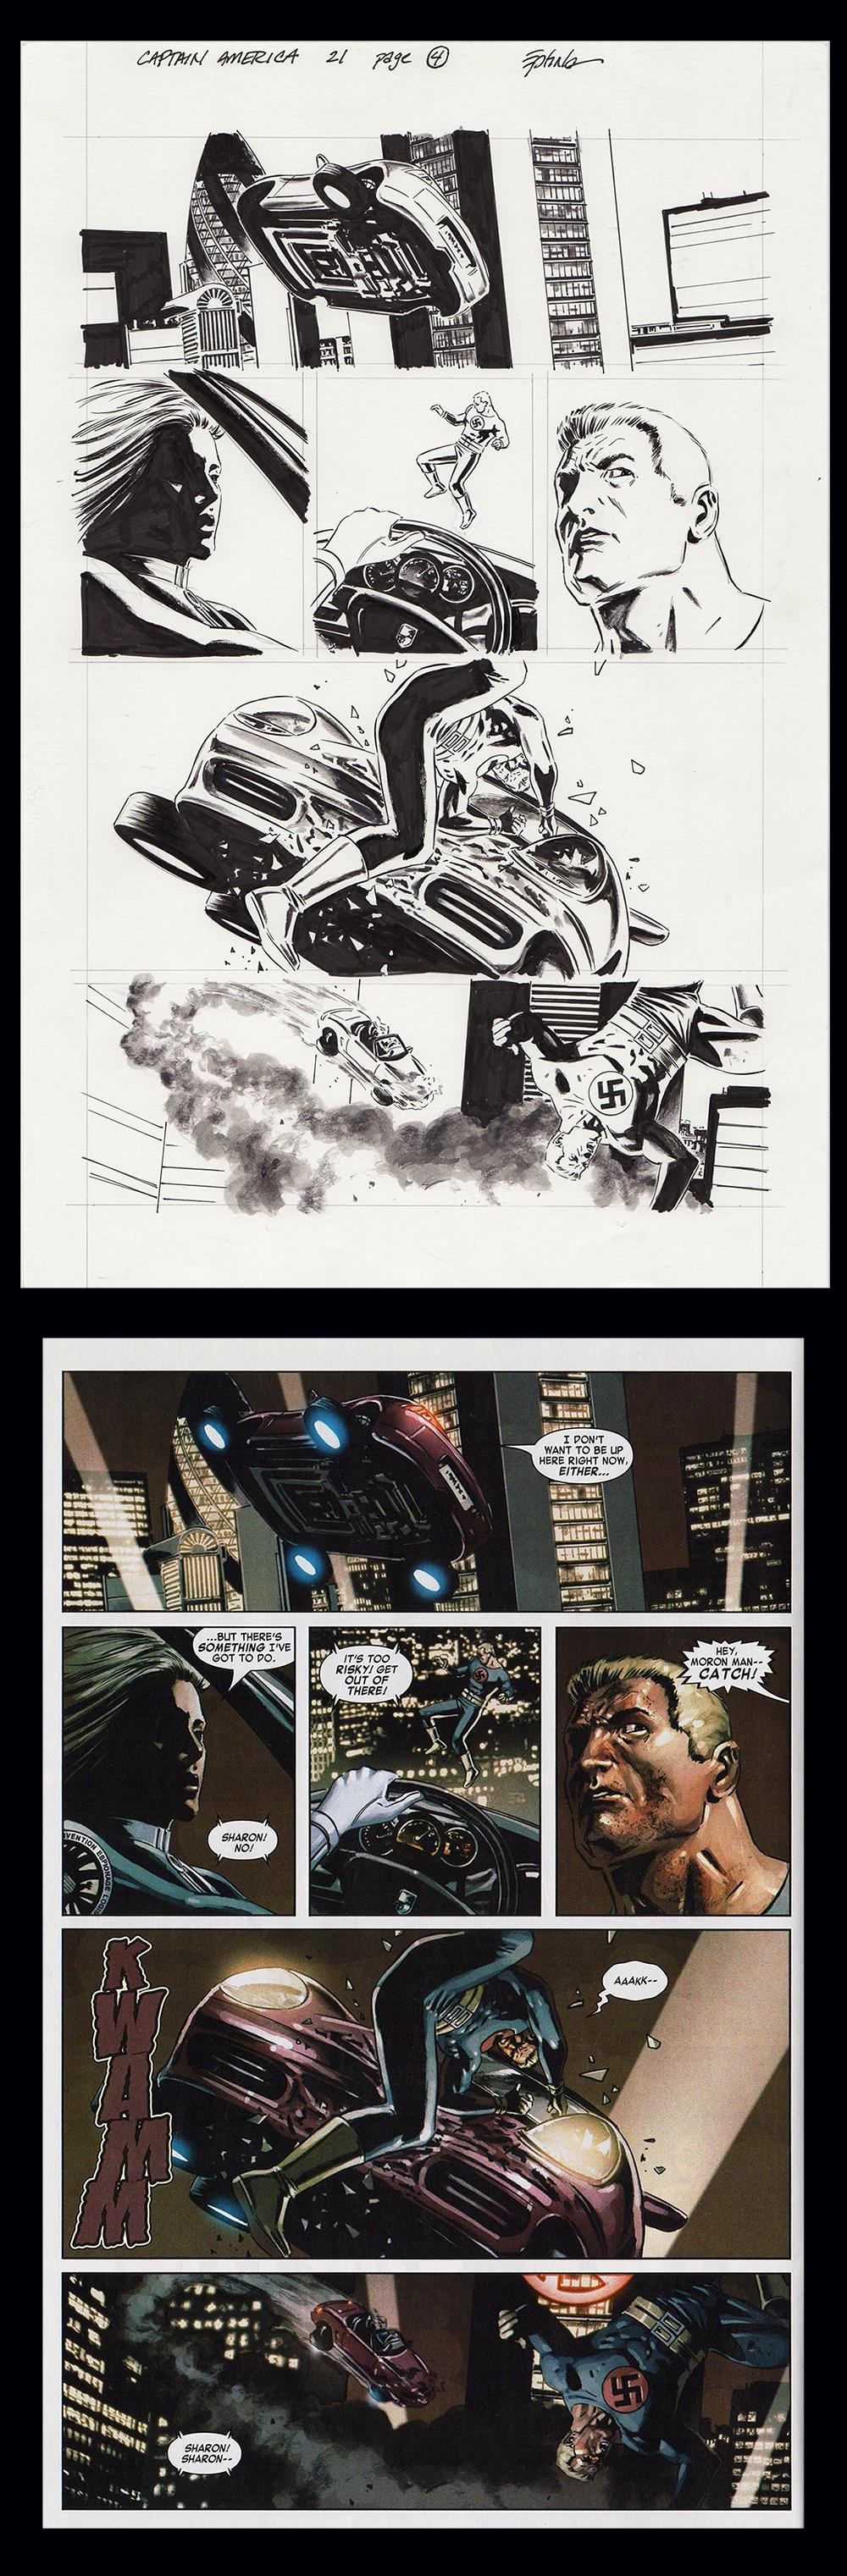 Image: Captain America Vol 5 #21 page 4 art by Steve Epting